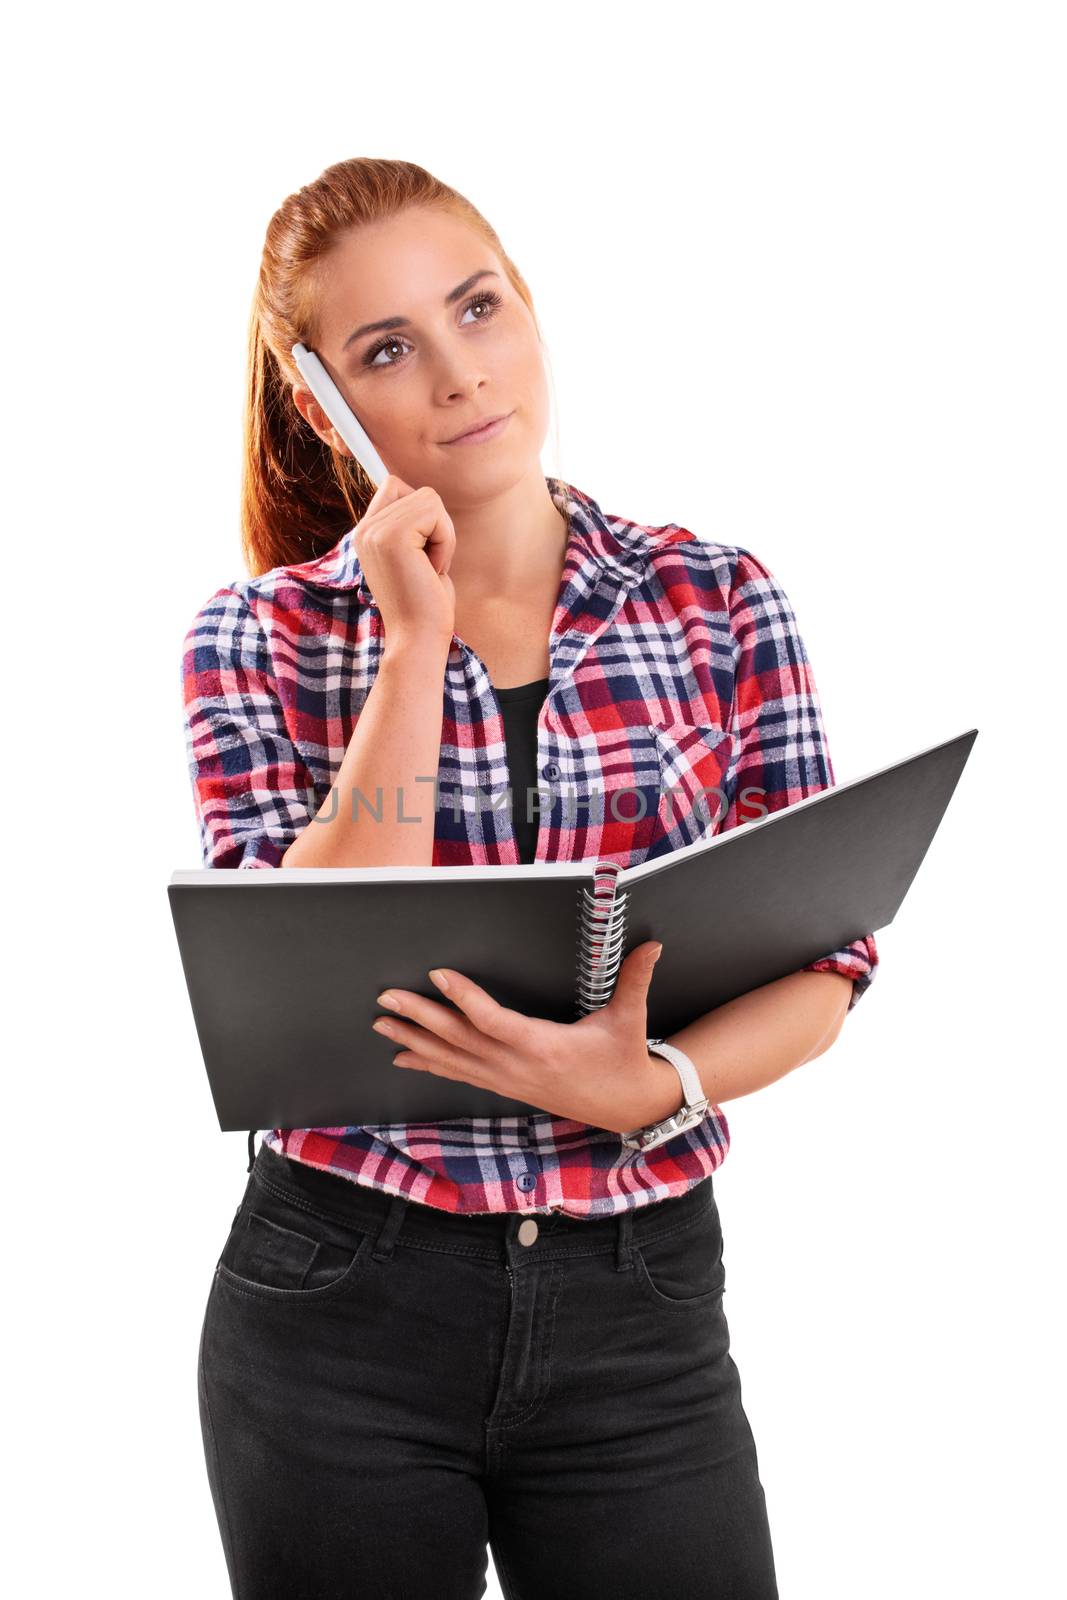 Beautiful young girl in casual clothes holing a notebook in her hand and a pen to her temple thinking, isolated on white background.